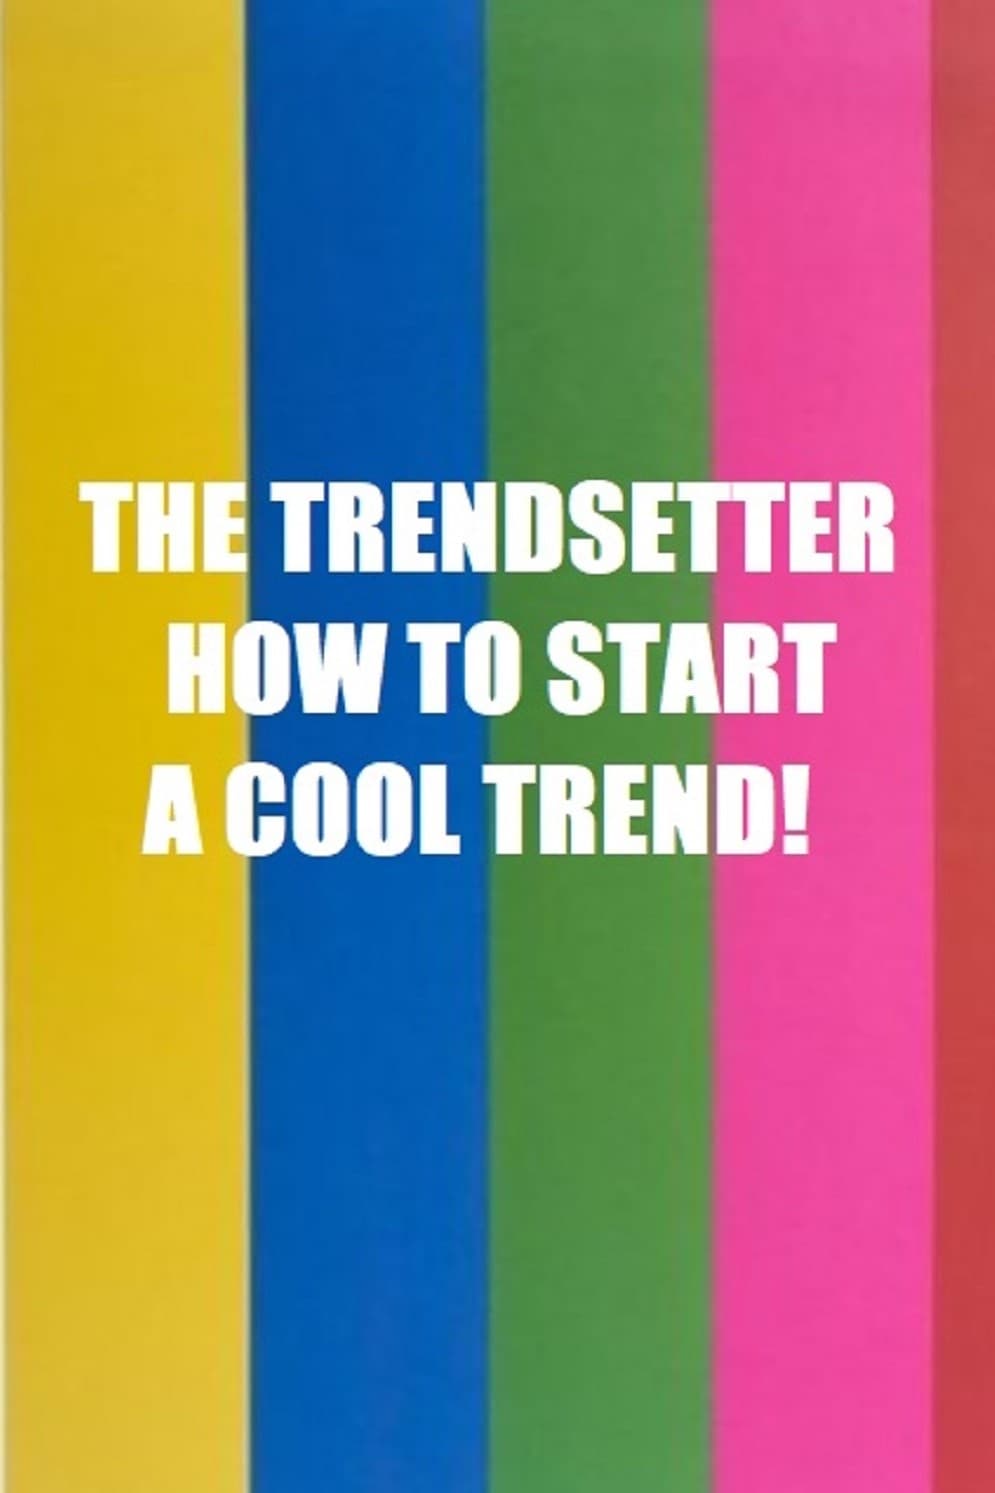 THE TRENDSETTER-HOW START A COOL TREND PODCAST